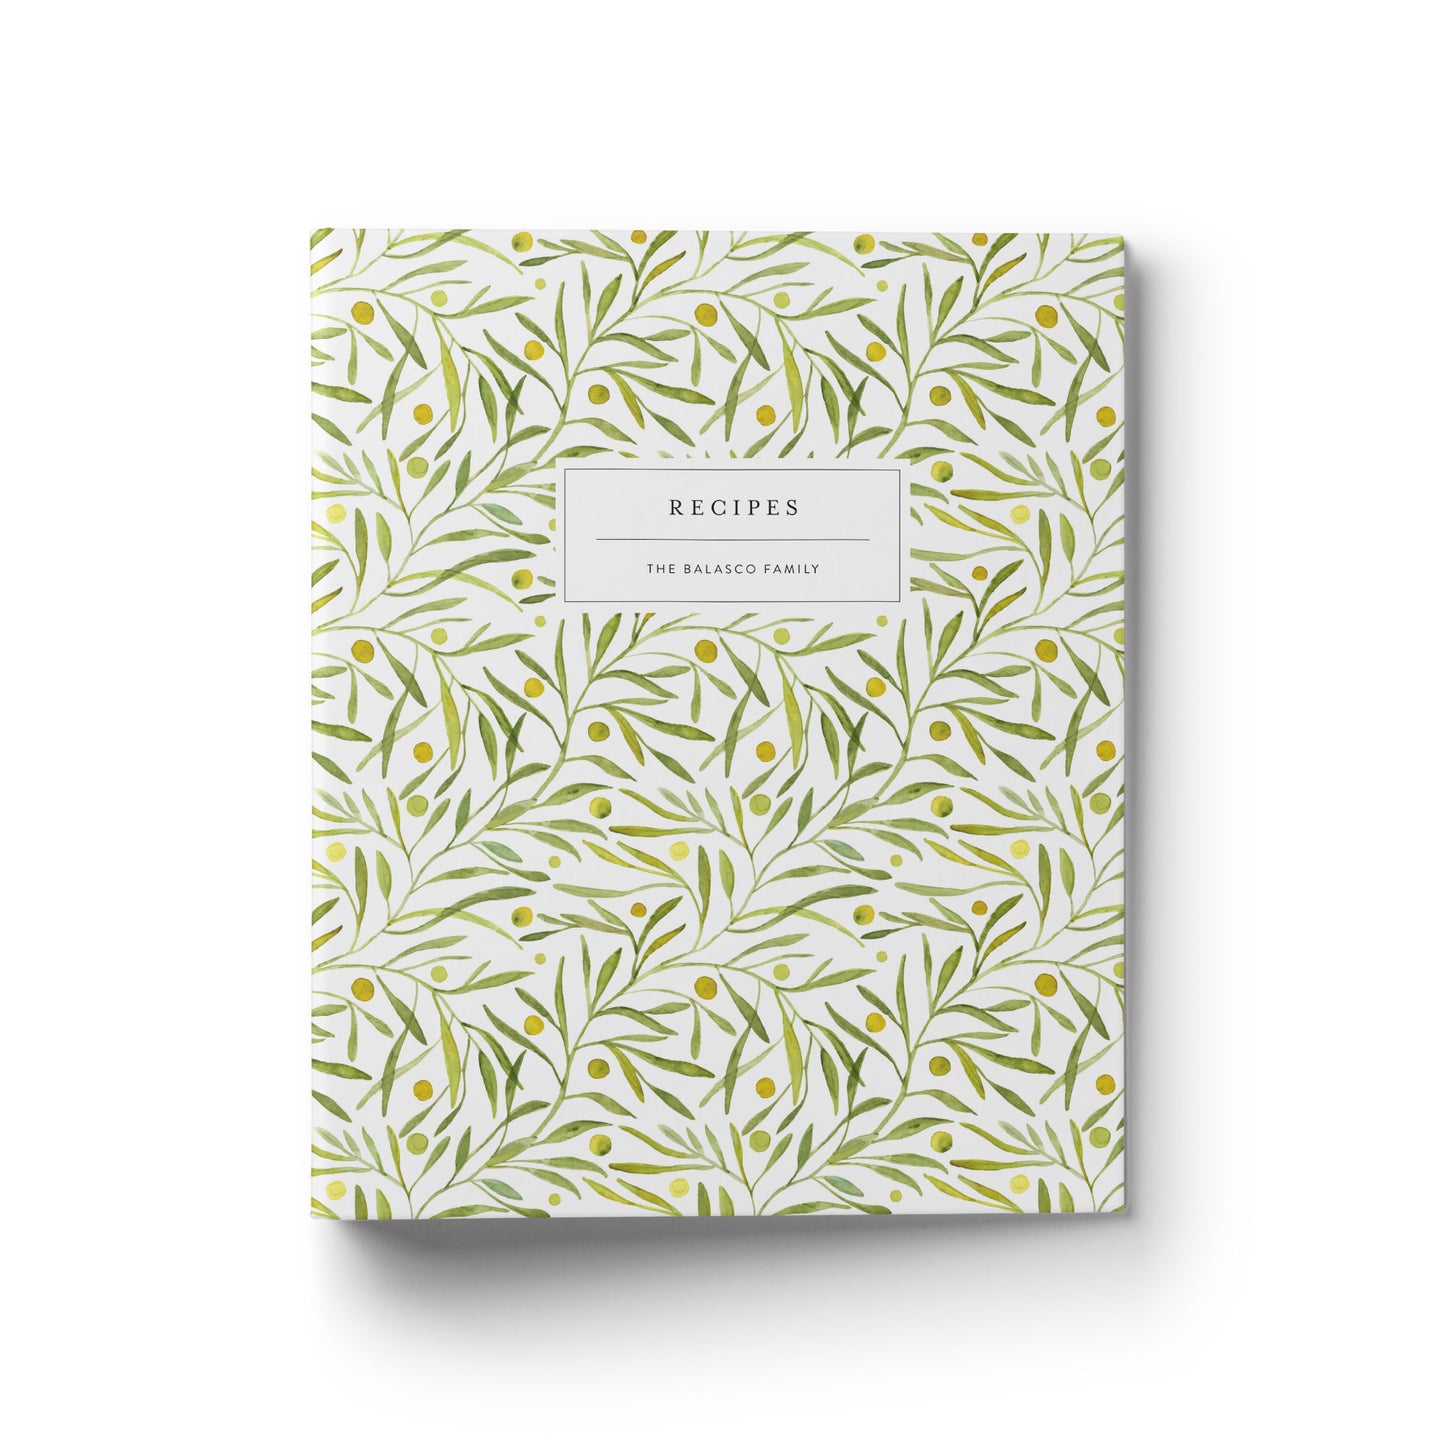 An olive leaf custom recipe binder makes the perfect gift for any occasion